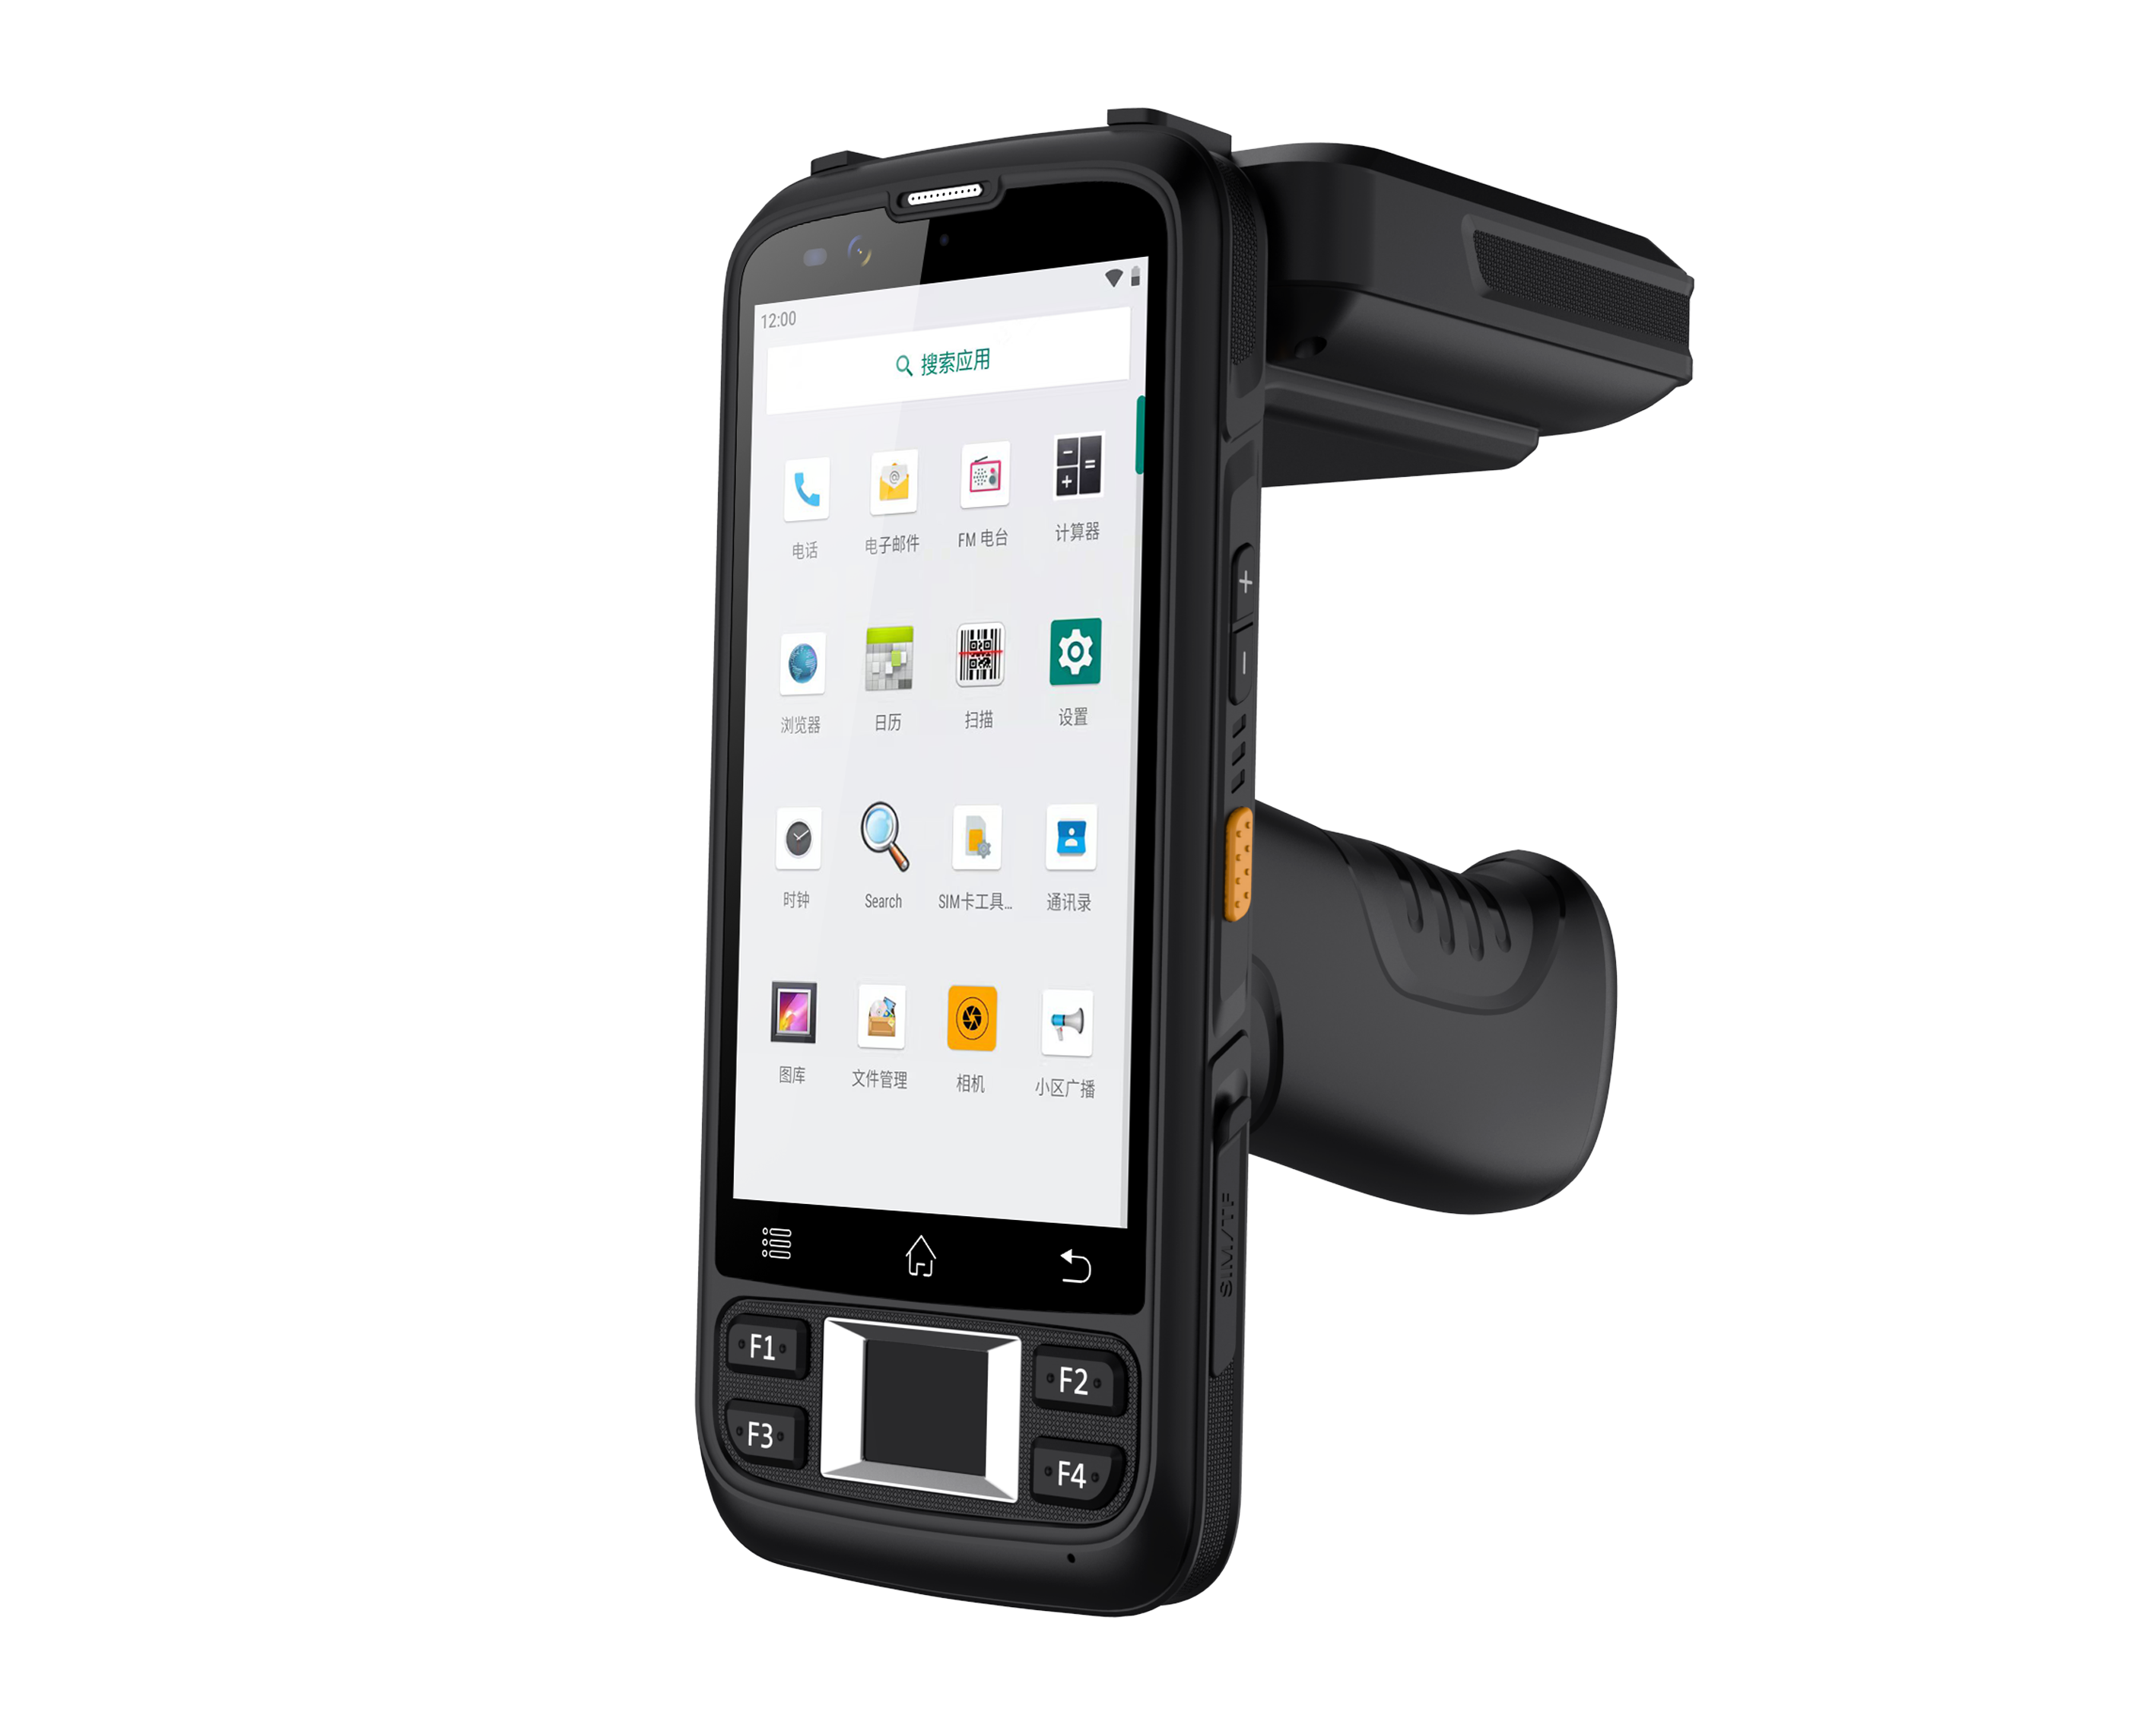 SM720S UHF Android Long Distance Handheld Barcode Scanner